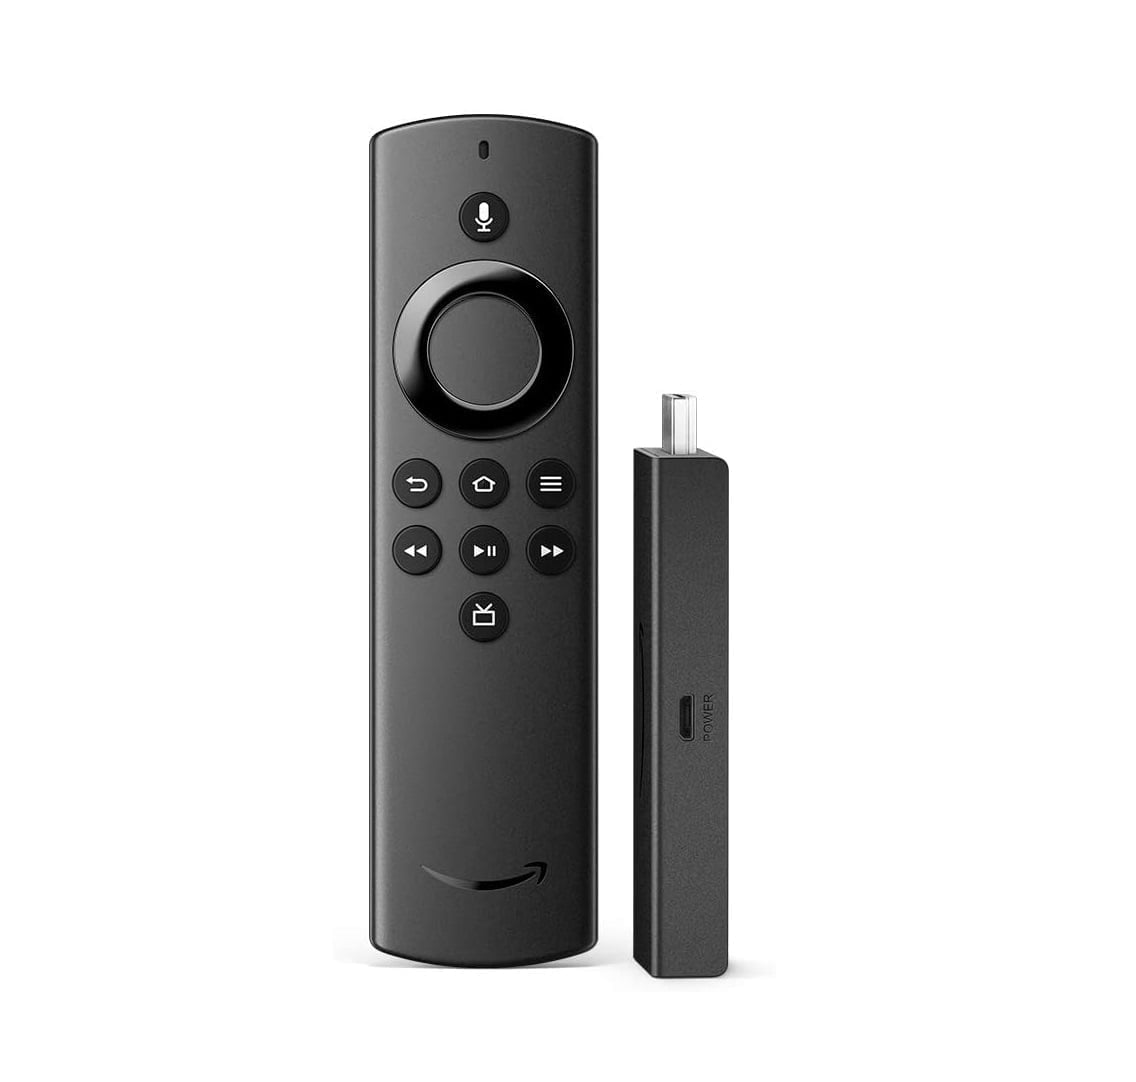 51Da2Zftfl. Ac Sl1000 Amazon &Amp;Lt;Ul&Amp;Gt; &Amp;Lt;Li&Amp;Gt;The Most Affordable Fire Tv Stick - Enjoy Fast Streaming In Full Hd. Comes With Alexa Voice Remote Lite.&Amp;Lt;/Li&Amp;Gt; &Amp;Lt;Li&Amp;Gt;Press And Ask Alexa - Use Your Voice To Easily Search And Launch Shows Across Multiple Apps.&Amp;Lt;/Li&Amp;Gt; &Amp;Lt;Li&Amp;Gt;Tens Of Thousands Of Channels, Alexa Skills, And Apps - Including Netflix, Youtube, Prime Video, Disney+, Apple Tv, And Hbo. Subscription Fees May Apply.&Amp;Lt;/Li&Amp;Gt; &Amp;Lt;Li&Amp;Gt;500,000+ Movies And Tv Episodes - With Thousands Included In Your Prime Membership.&Amp;Lt;/Li&Amp;Gt; &Amp;Lt;Li&Amp;Gt;Live Tv - Watch Your Favorite Live Tv, News, And Sports With Subscriptions To Sling Tv, Youtube Tv, And Others.&Amp;Lt;/Li&Amp;Gt; &Amp;Lt;Li&Amp;Gt;Free Tv - Access Over 20,000 Free Movies And Tv Shows From Apps Like Imdb Tv, Tubi, Pluto Tv And More.&Amp;Lt;/Li&Amp;Gt; &Amp;Lt;Li&Amp;Gt;Listen To Music - Stream On Amazon Music, Spotify, Pandora, And Others. Subscription Fees May Apply.&Amp;Lt;/Li&Amp;Gt; &Amp;Lt;Li&Amp;Gt;Easy To Set Up, Stays Hidden - Plug In Behind Your Tv, Turn On The Tv, And Connect To The Internet To Get Set Up.&Amp;Lt;/Li&Amp;Gt; &Amp;Lt;Li&Amp;Gt;Food Network Kitchen Subscription - Live Q&Amp;Amp;A With Culinary Expert And More With A 1-Year Complimentary Subscription.&Amp;Lt;/Li&Amp;Gt; &Amp;Lt;Li&Amp;Gt;Certified For Humans: Struggle-Free, Tinker-Free, And Stress-Free. No Patience Needed—It'S Actually Simple.&Amp;Lt;/Li&Amp;Gt; &Amp;Lt;/Ul&Amp;Gt; &Amp;Lt;H3&Amp;Gt;Included In The Box Fire Tv Stick Lite, Alexa Voice Remote Lite, Usb Cable And Power Adapter, Hdmi Extender, 2 Aaa Batteries,&Amp;Lt;/H3&Amp;Gt; &Amp;Lt;Ul&Amp;Gt; &Amp;Lt;Li&Amp;Gt;The Included Alexa Voice Remote Lite Does Not Have Tv Controls And Will Not Control Power And Volume On Your Tv, Soundbar, Or Receiver. If These Features Interest You, We Recommend Fire Tv Stick, Which Comes With Alexa Voice Remote With Tv Controls.&Amp;Lt;/Li&Amp;Gt; &Amp;Lt;/Ul&Amp;Gt; Fire Tv Stick Lite With Alexa Voice Remote Lite | Hd Streaming Device | 2020 Release